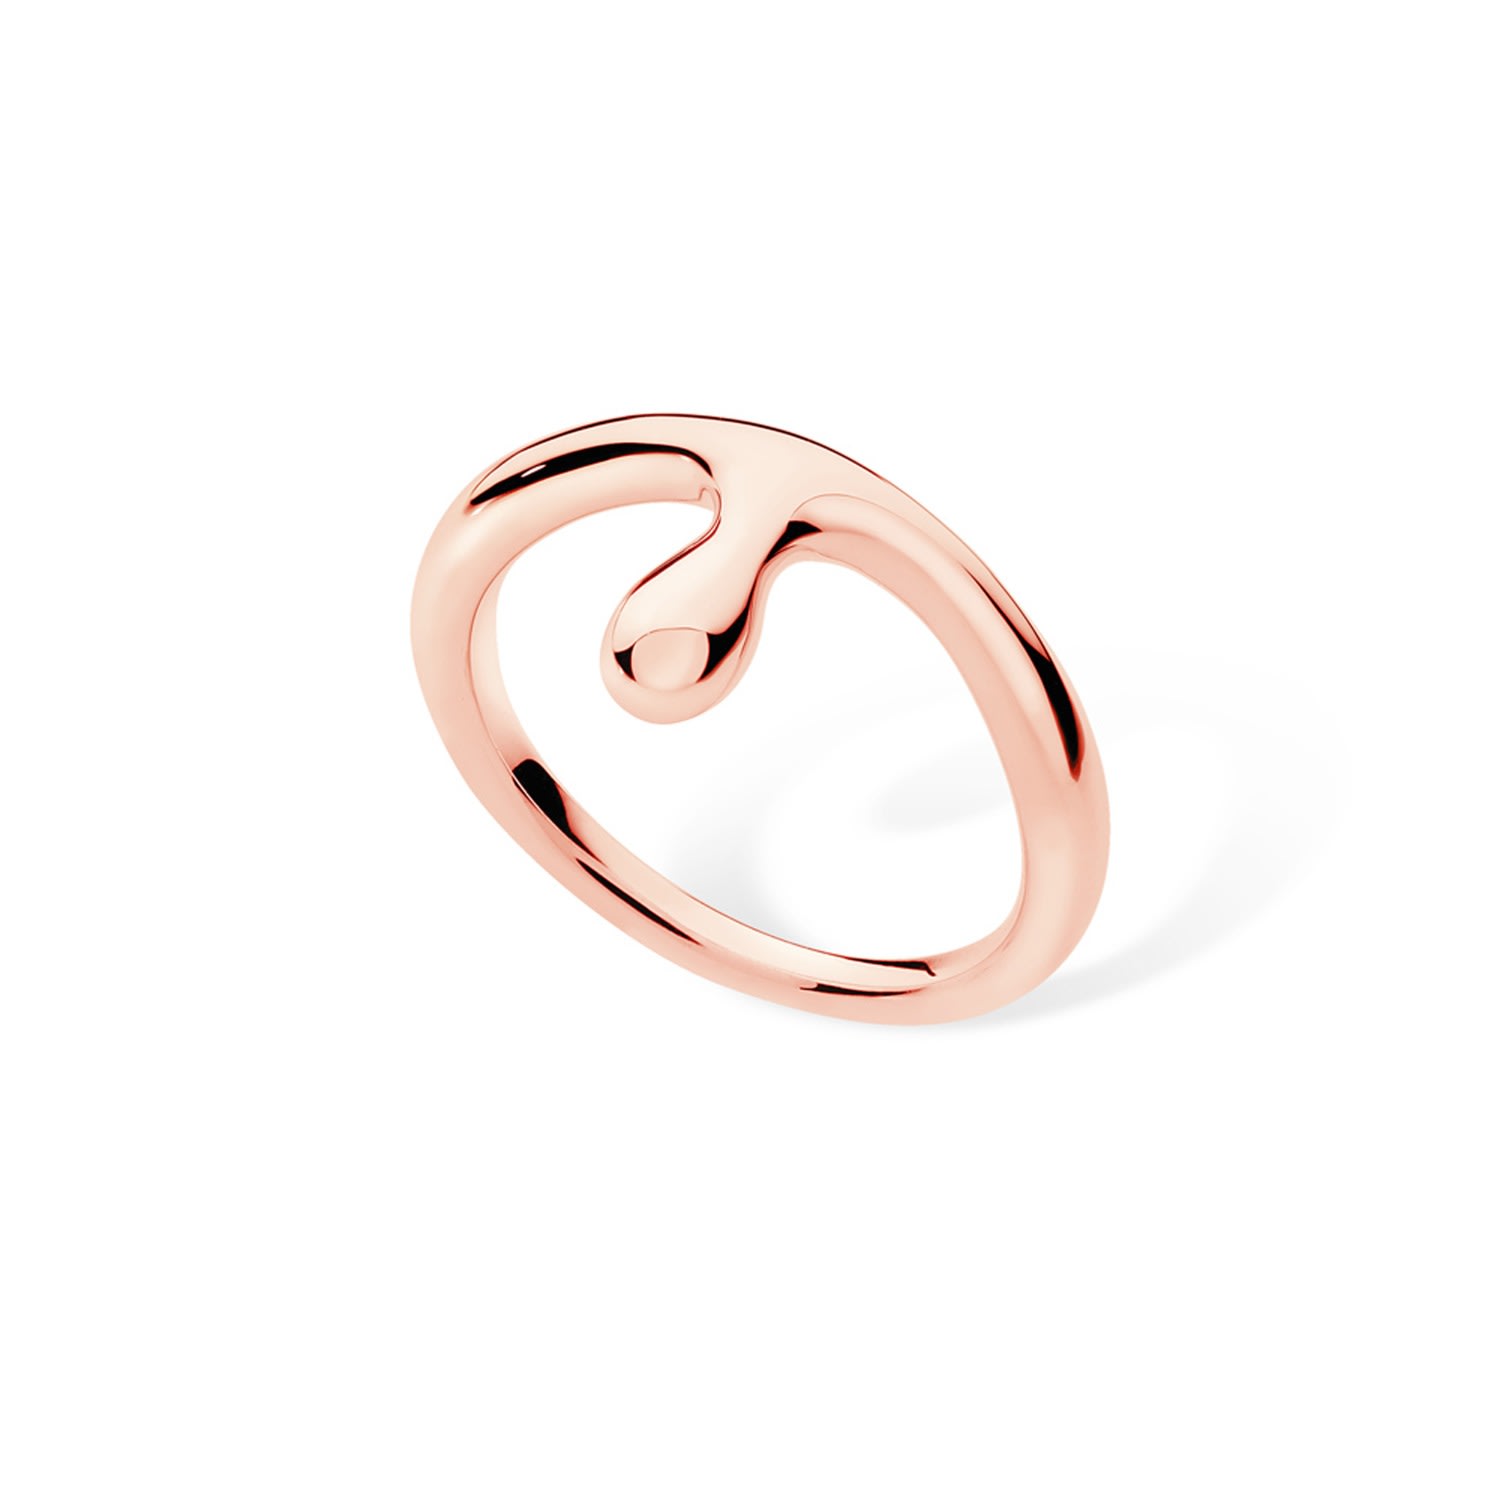 Lucy Quartermaine Women's Dripping Ring In Rose Gold Vermeil In Pink